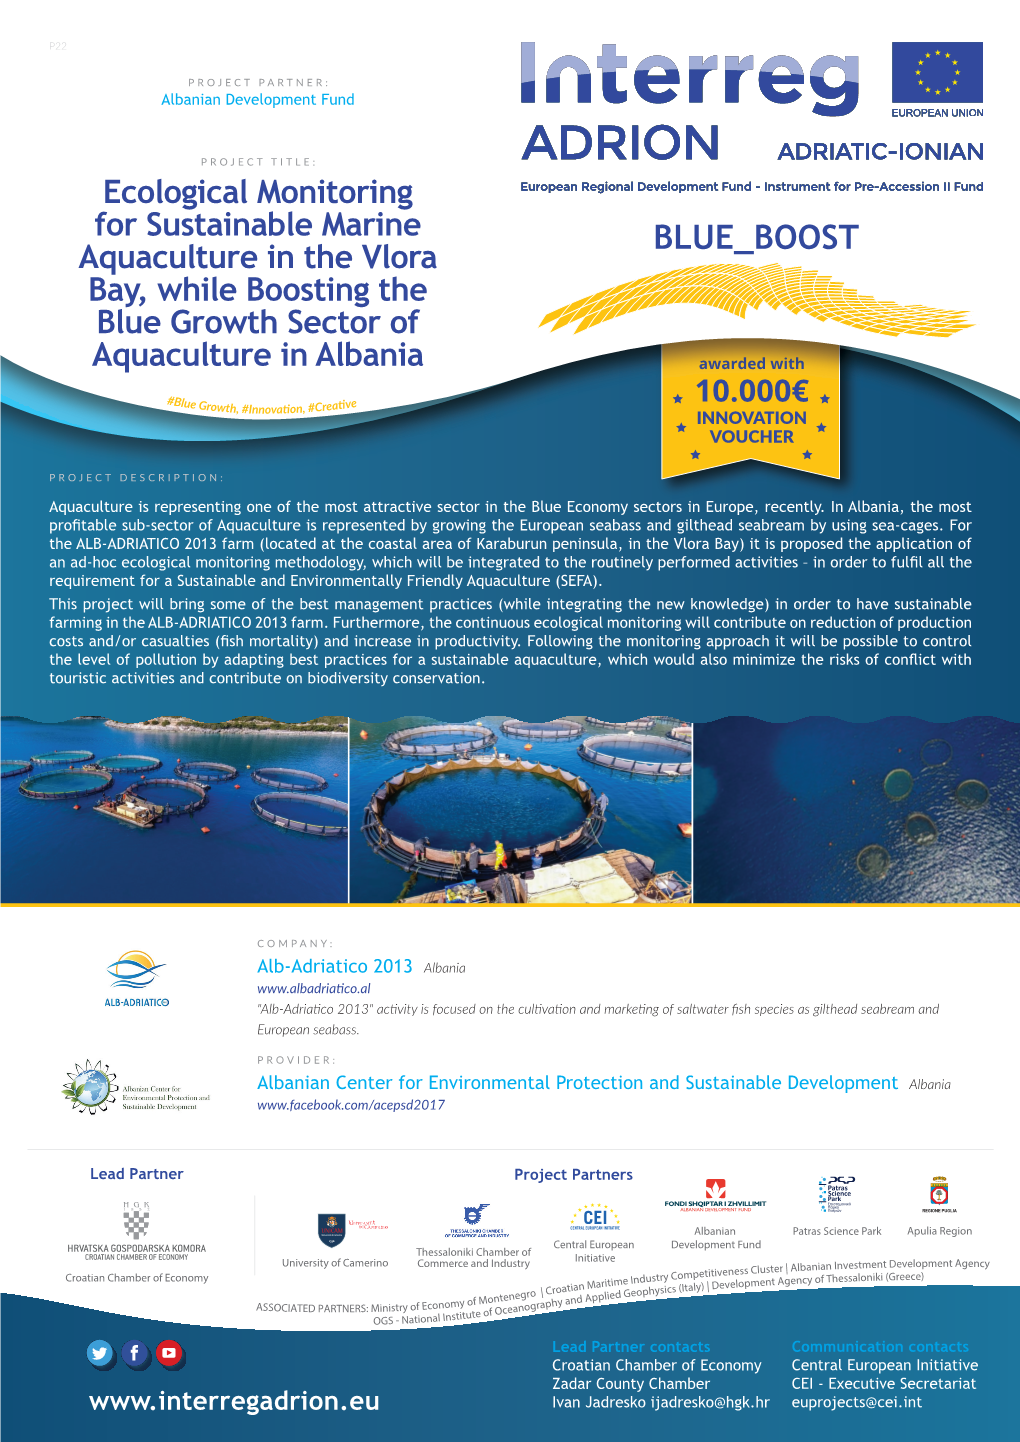 Ecological Monitoring for Sustainable Marine Aquaculture in the Vlora Bay, While Boosting the Blue Growth Sector Of